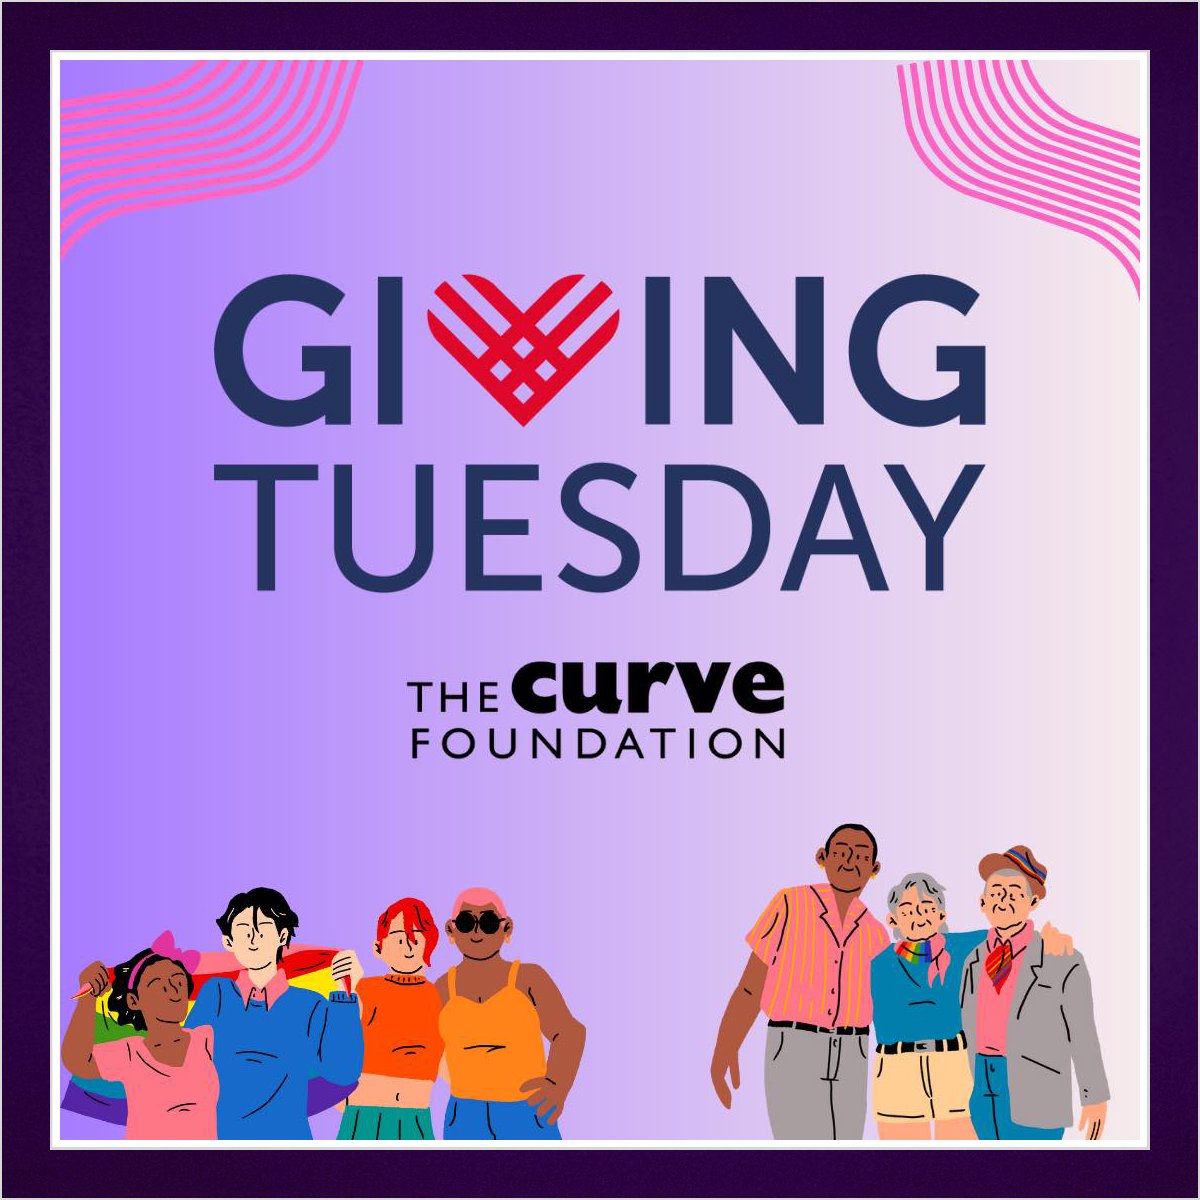 ⏰ There's still time to support @CurveFdn this #GivingTuesday ... consider making a donation - every single dollar supports the foundation's mission to champion lesbian, queer women, transgender and nonbinary people’s stories and culture: 👉 tinyurl.com/CurveFdnDonate #LGBTQ 💜🏳️‍🌈